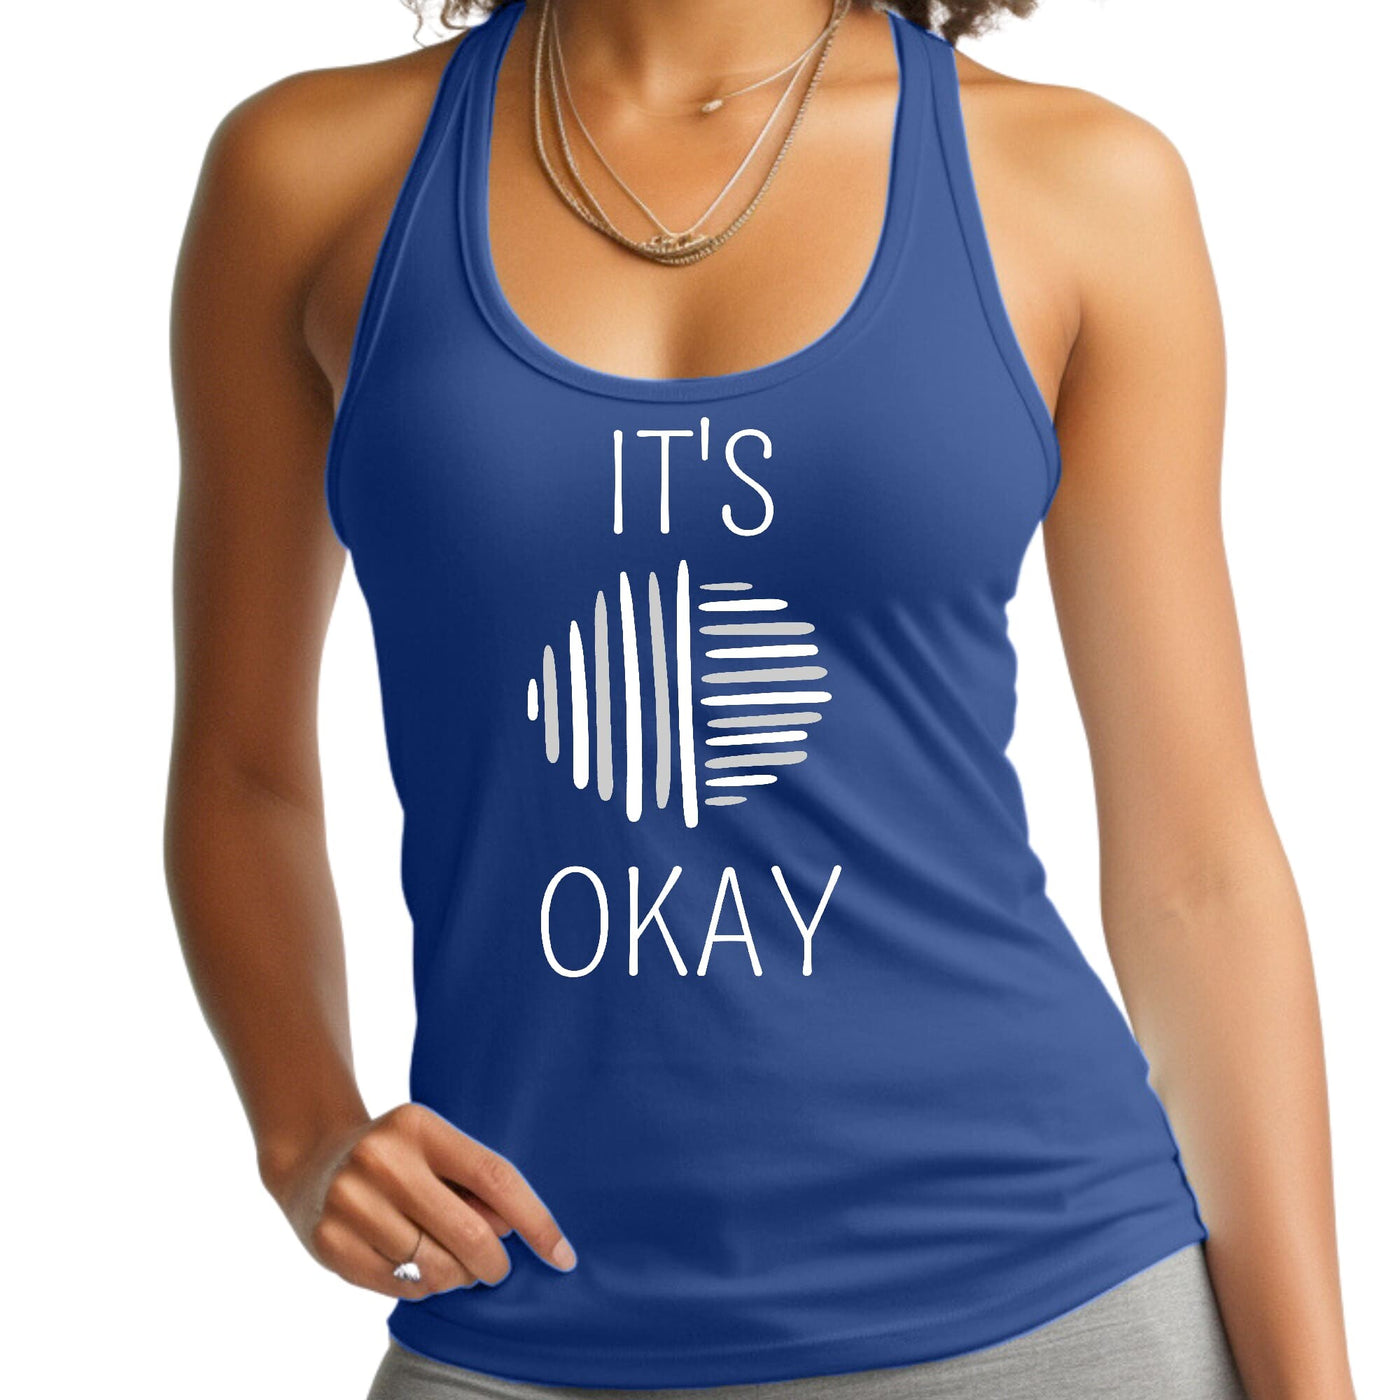 Womens Tank Top Fitness Shirt Say It Soul Its Okay Grey And White - Womens